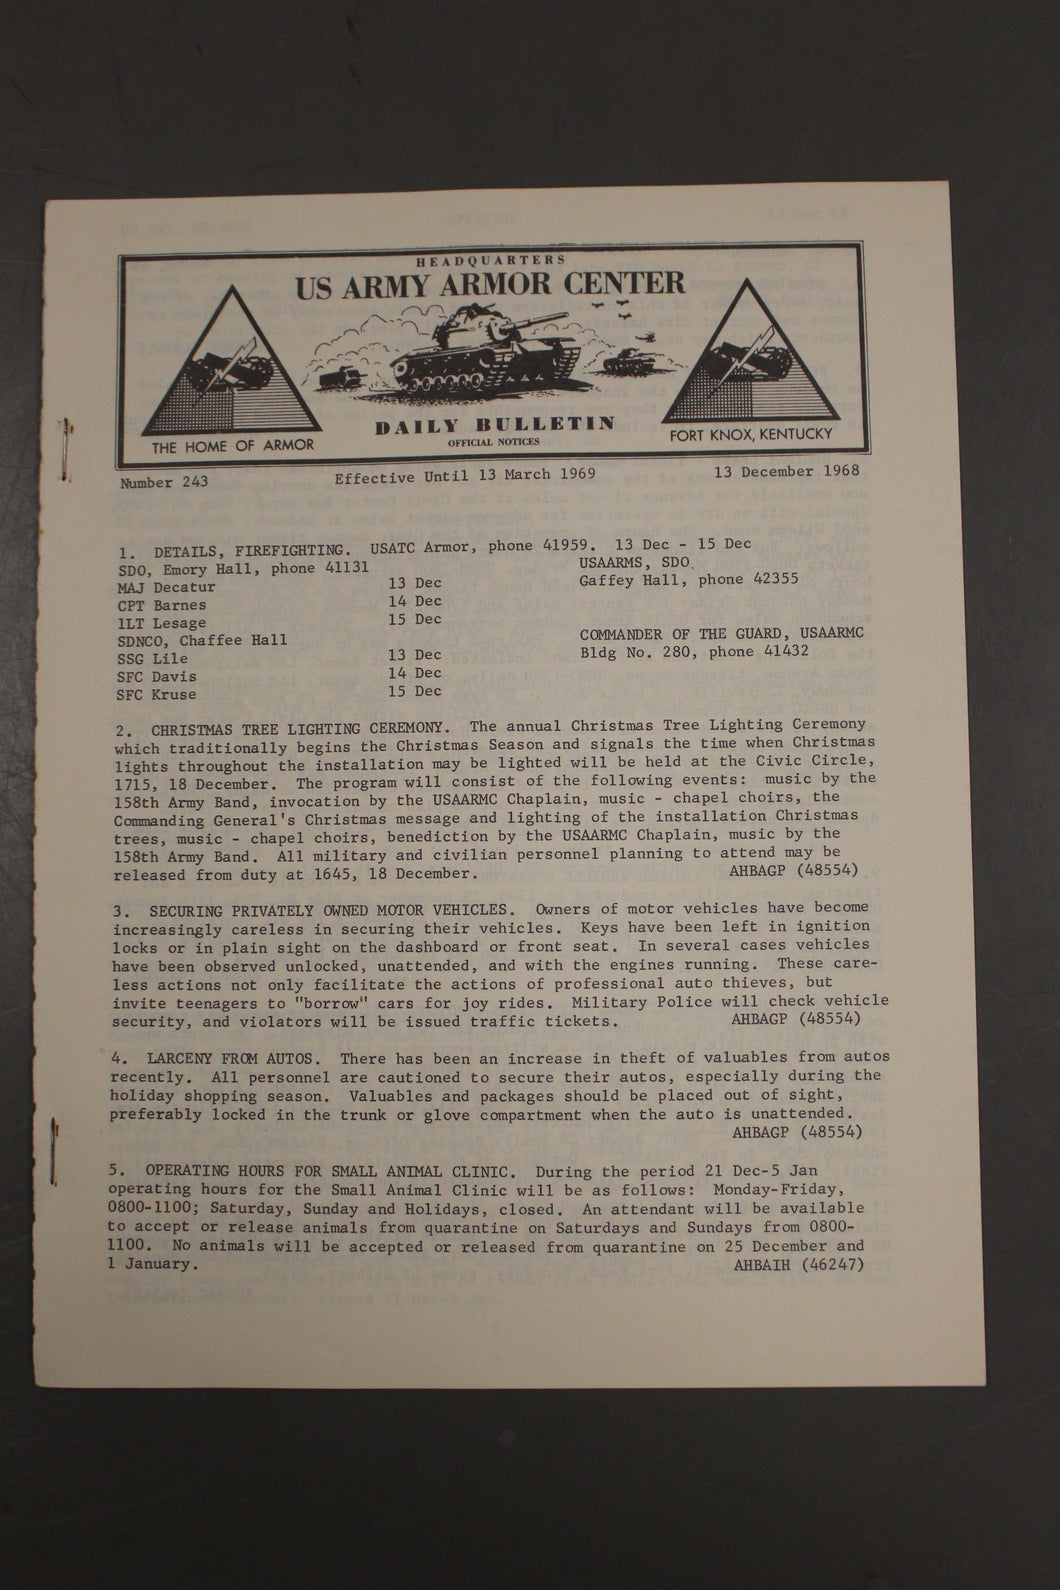 US Army Armor Center Daily Bulletin Official Notices, No 243, December 13, 1968